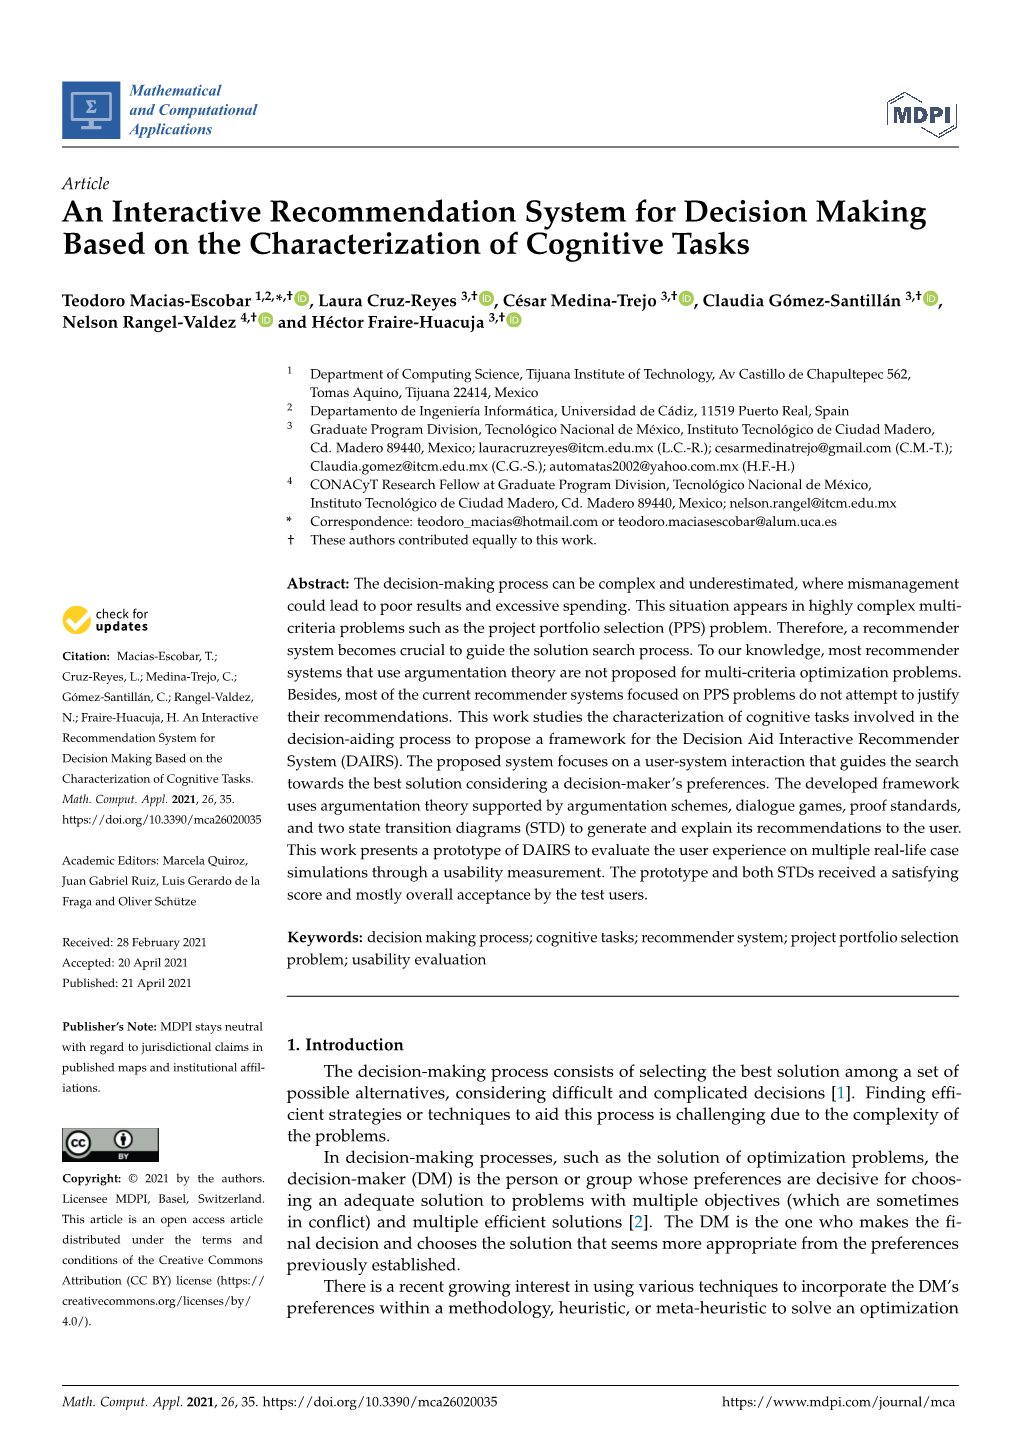 An Interactive Recommendation System for Decision Making Based on the Characterization of Cognitive Tasks